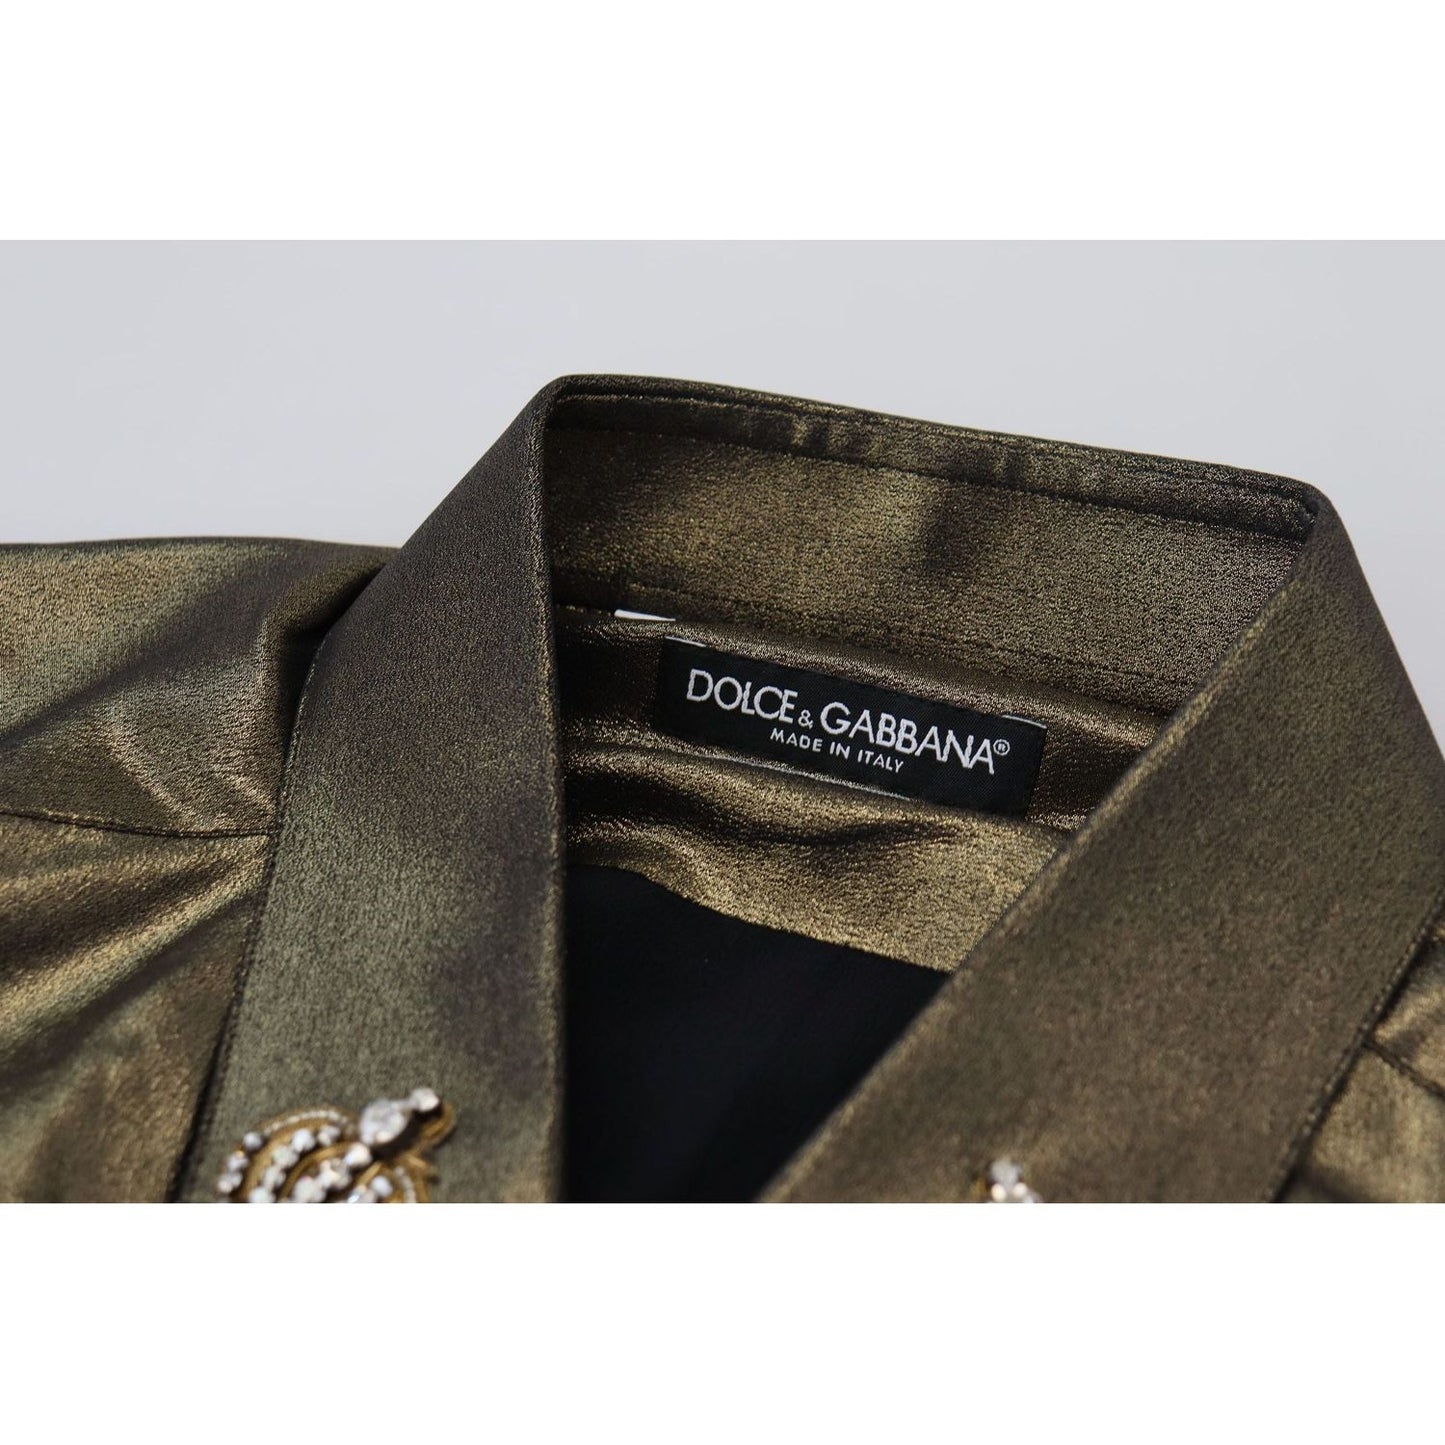 Dolce & Gabbana Elegant Gold Slim Fit Shirt with Crown Embroidery metallic-gold-dg-embroidered-crown-silk-shirt IMG_7243-scaled-018ff7d7-edd.jpg